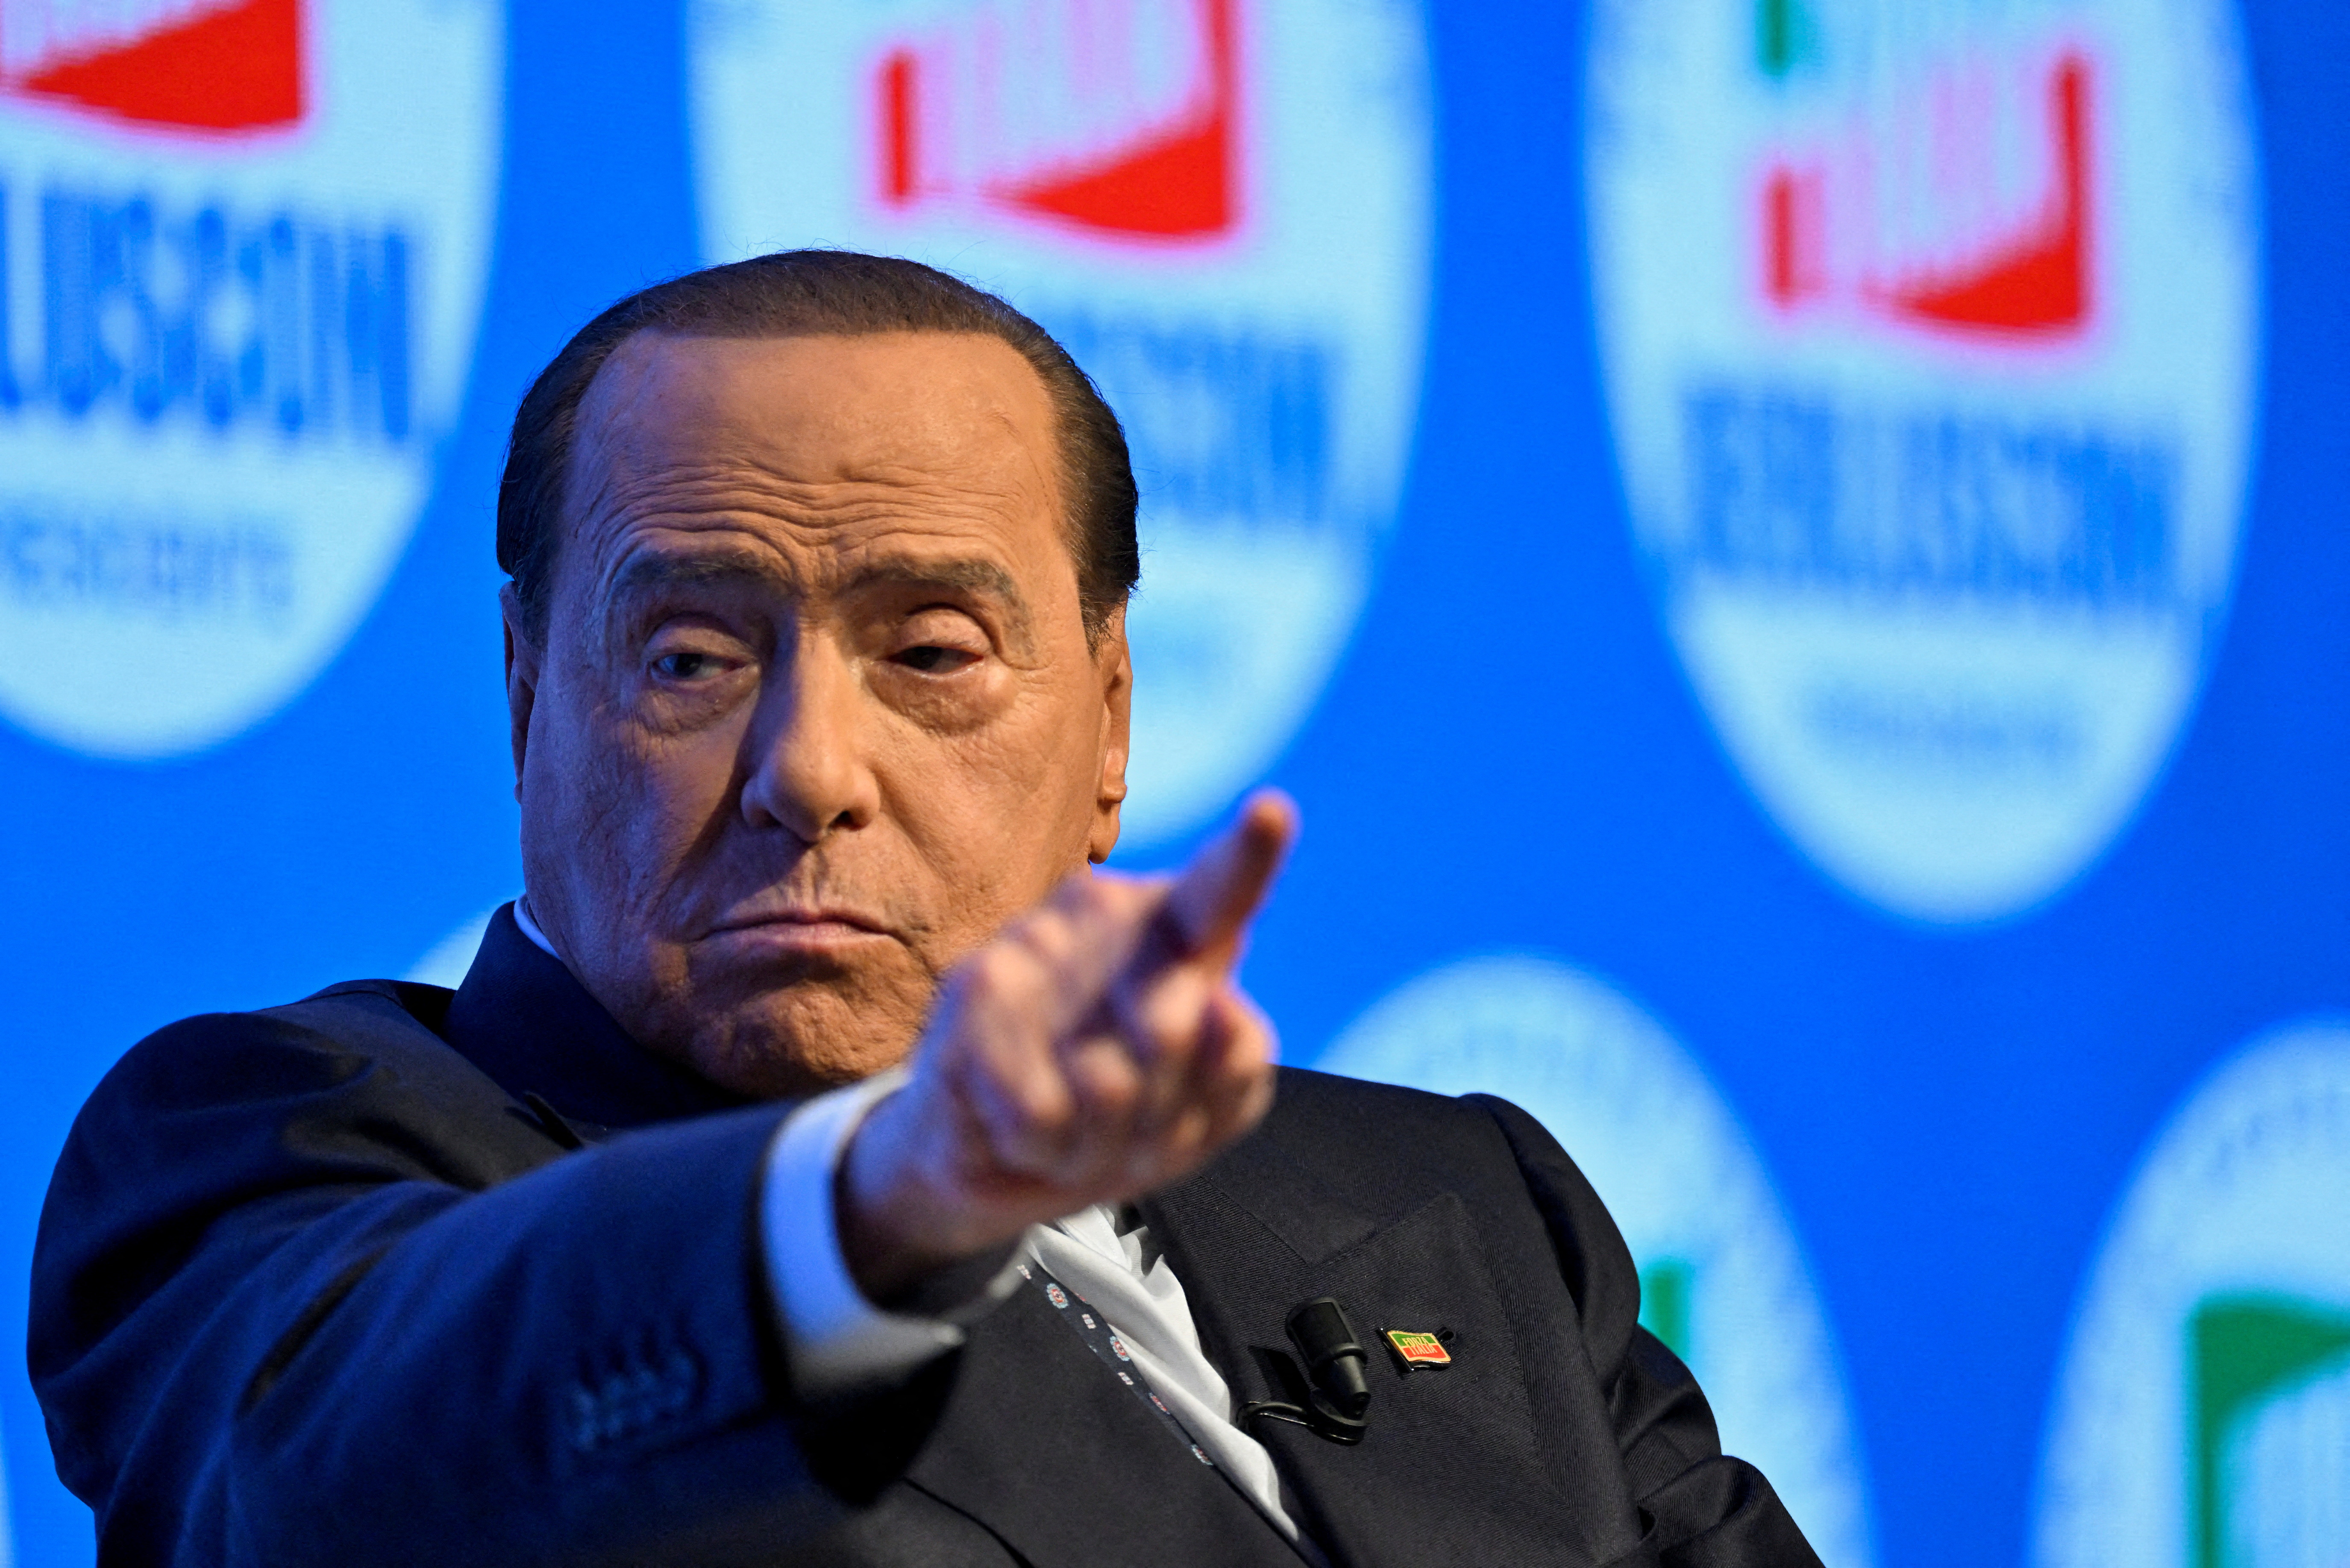 Former Italian prime minister Silvio Berlusconi gestures during a campaign rally